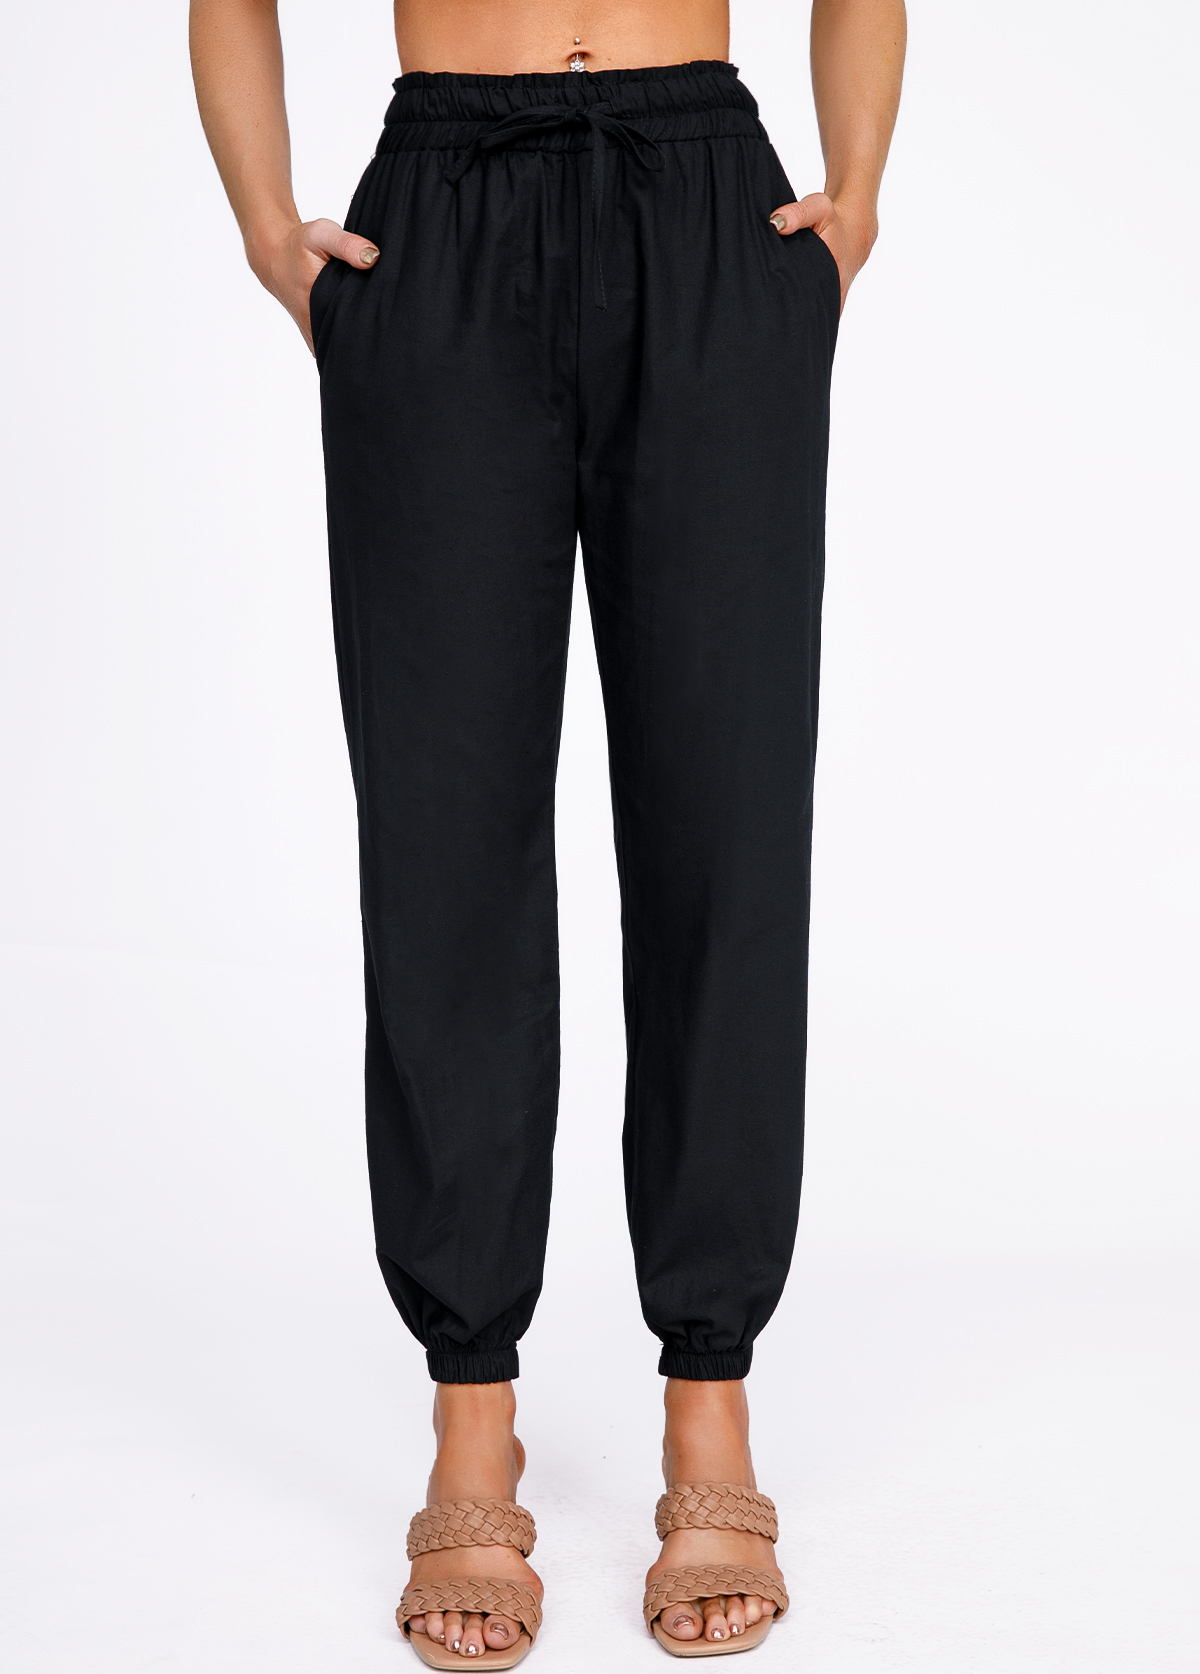 Drawstring Black Belted High Waisted Pants